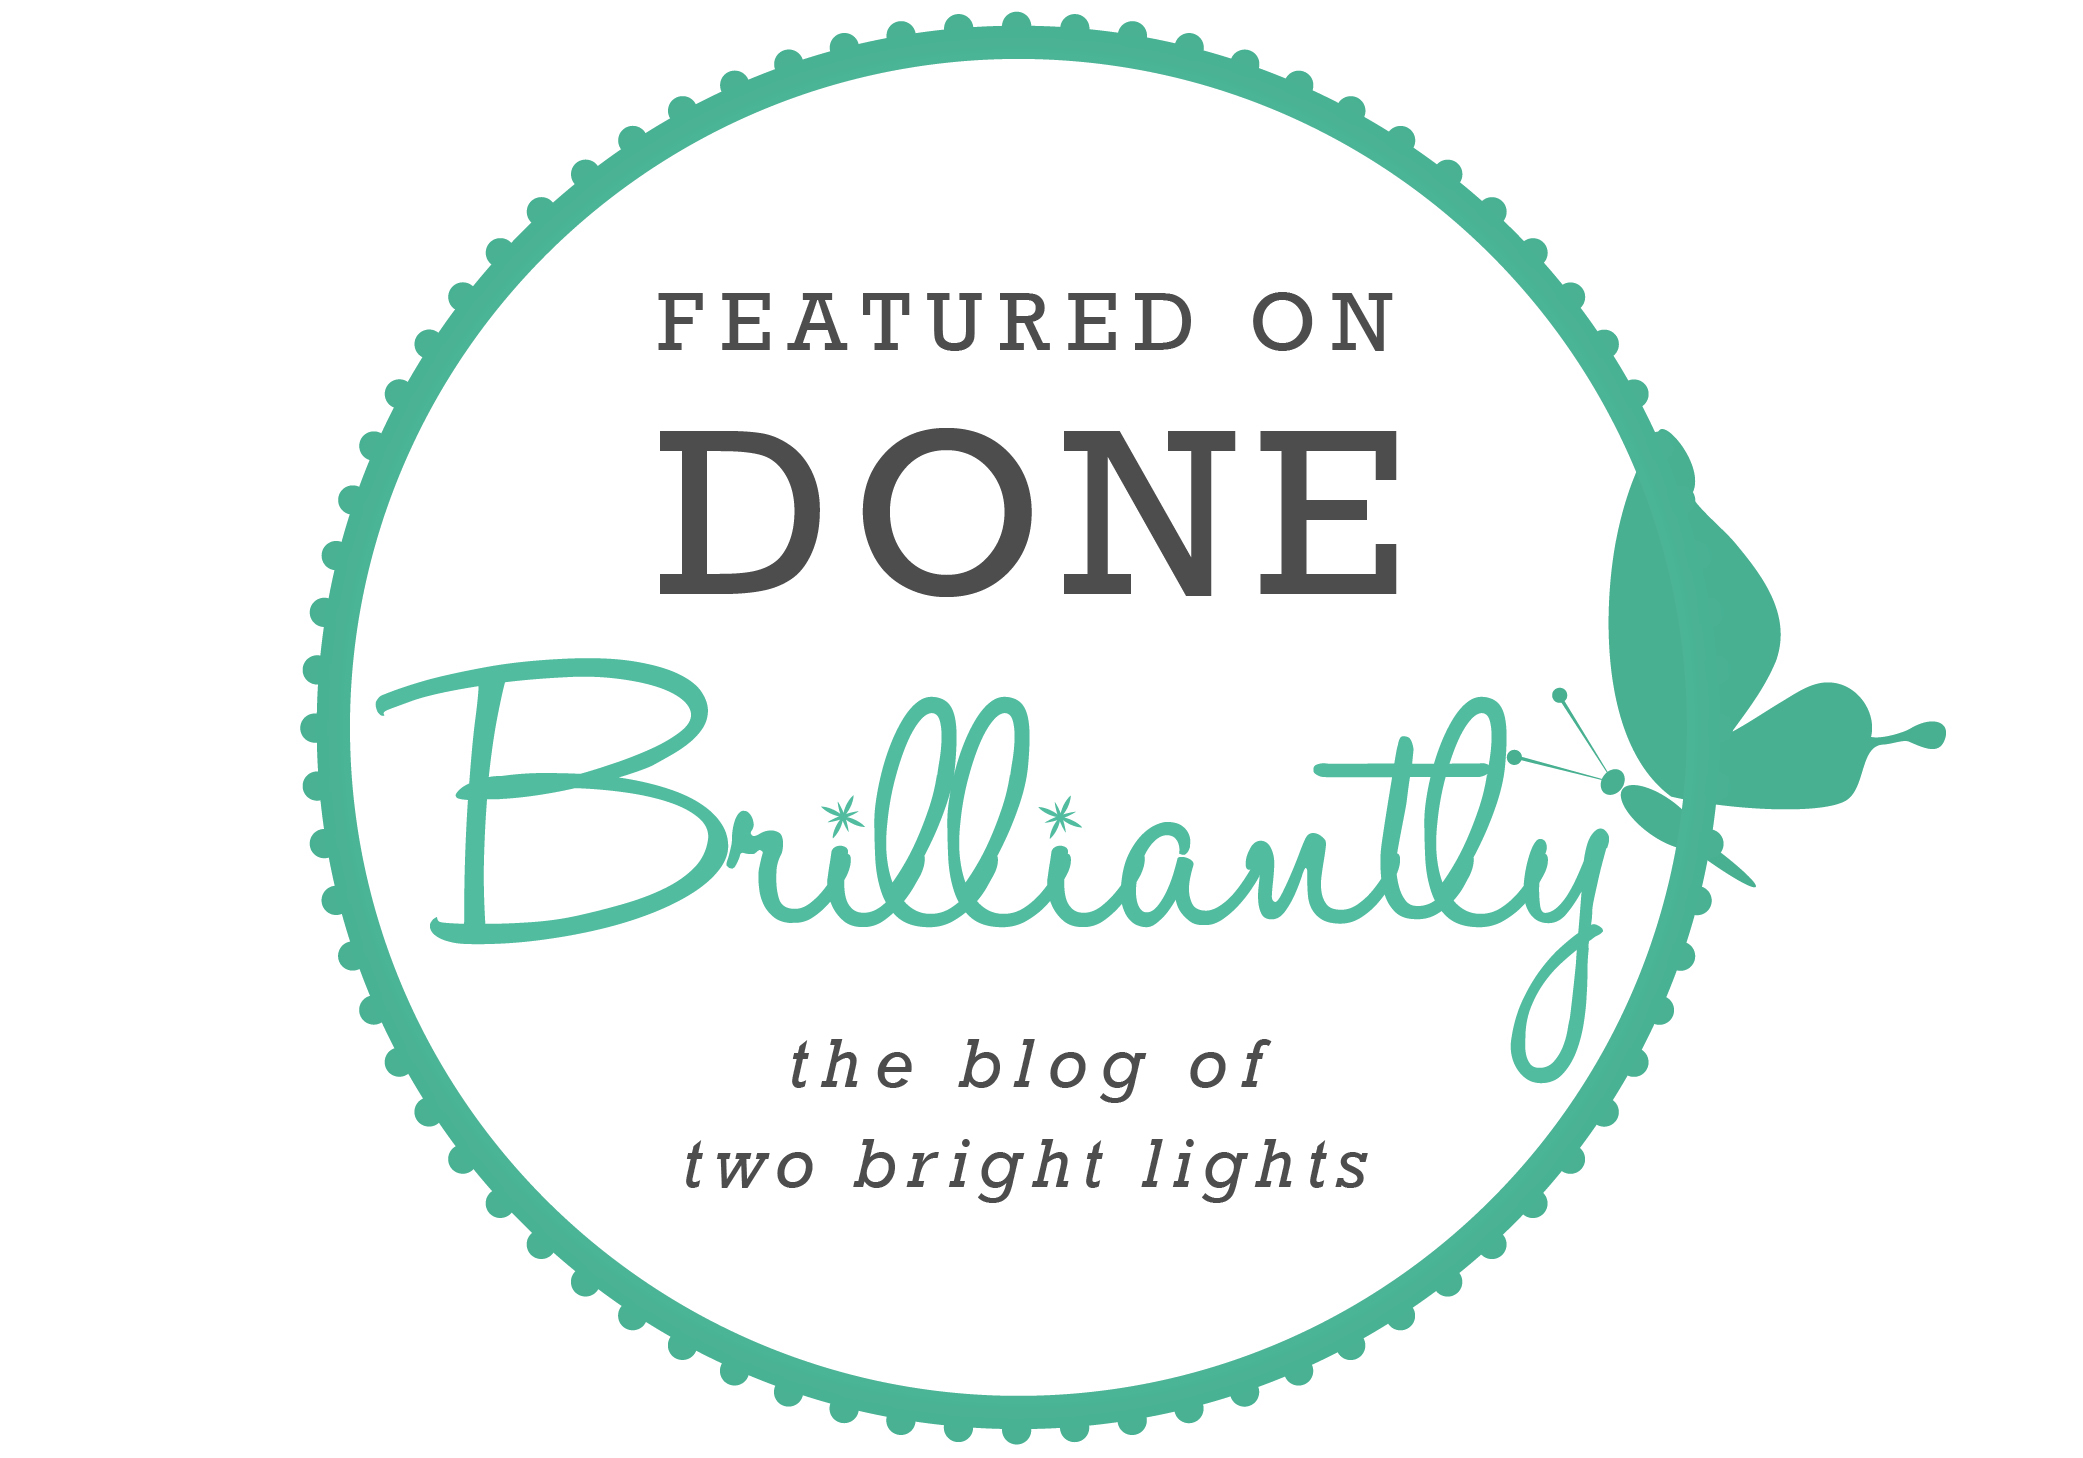 Featured on the Done Brilliantly Blog